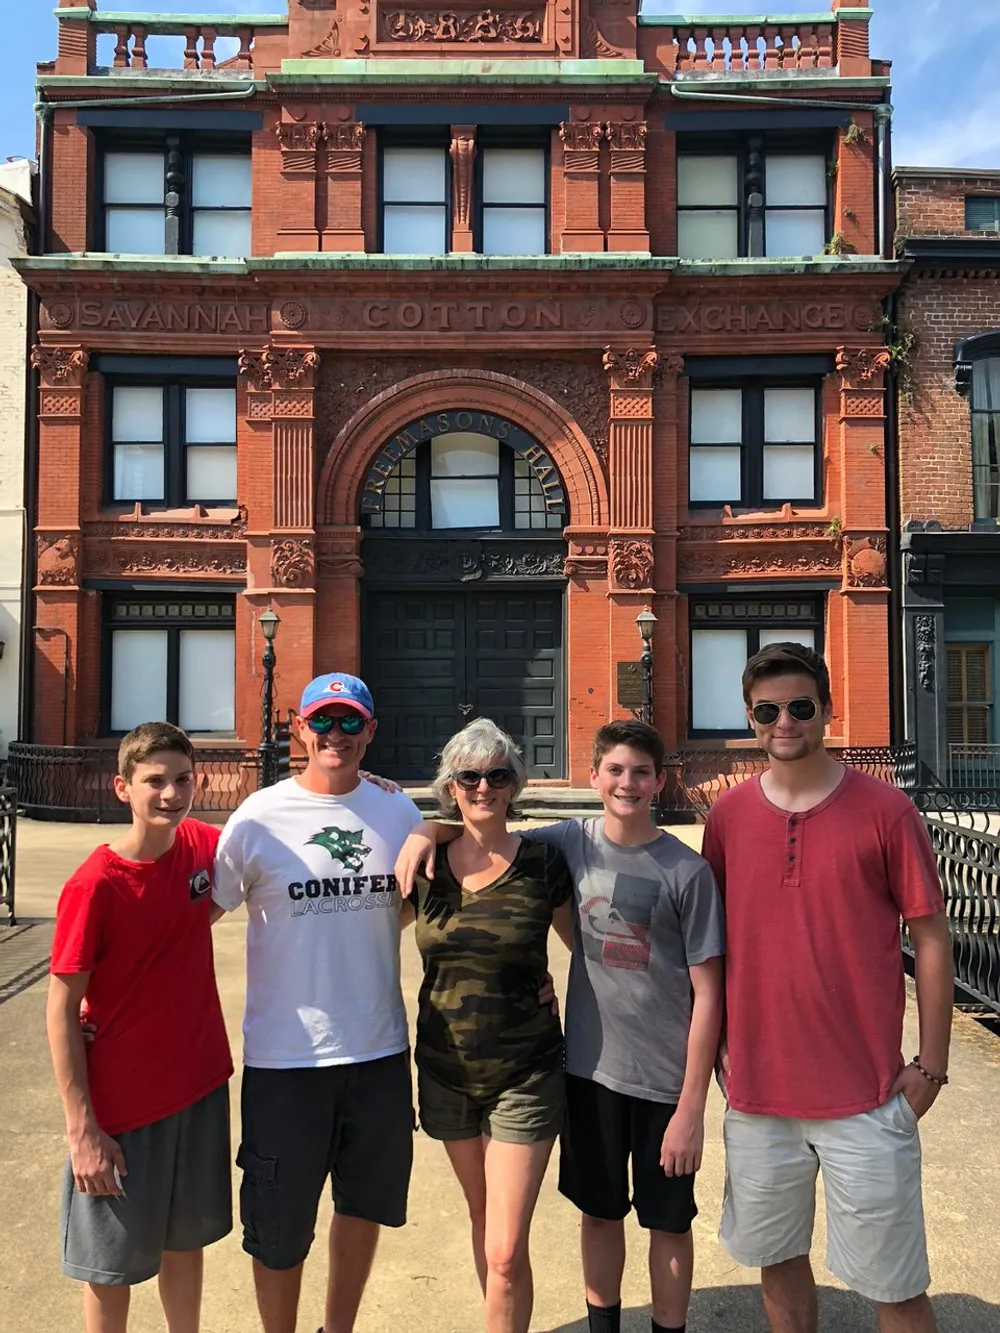 A group of five people is standing in front of the Savannah Cotton Exchange building on a sunny day